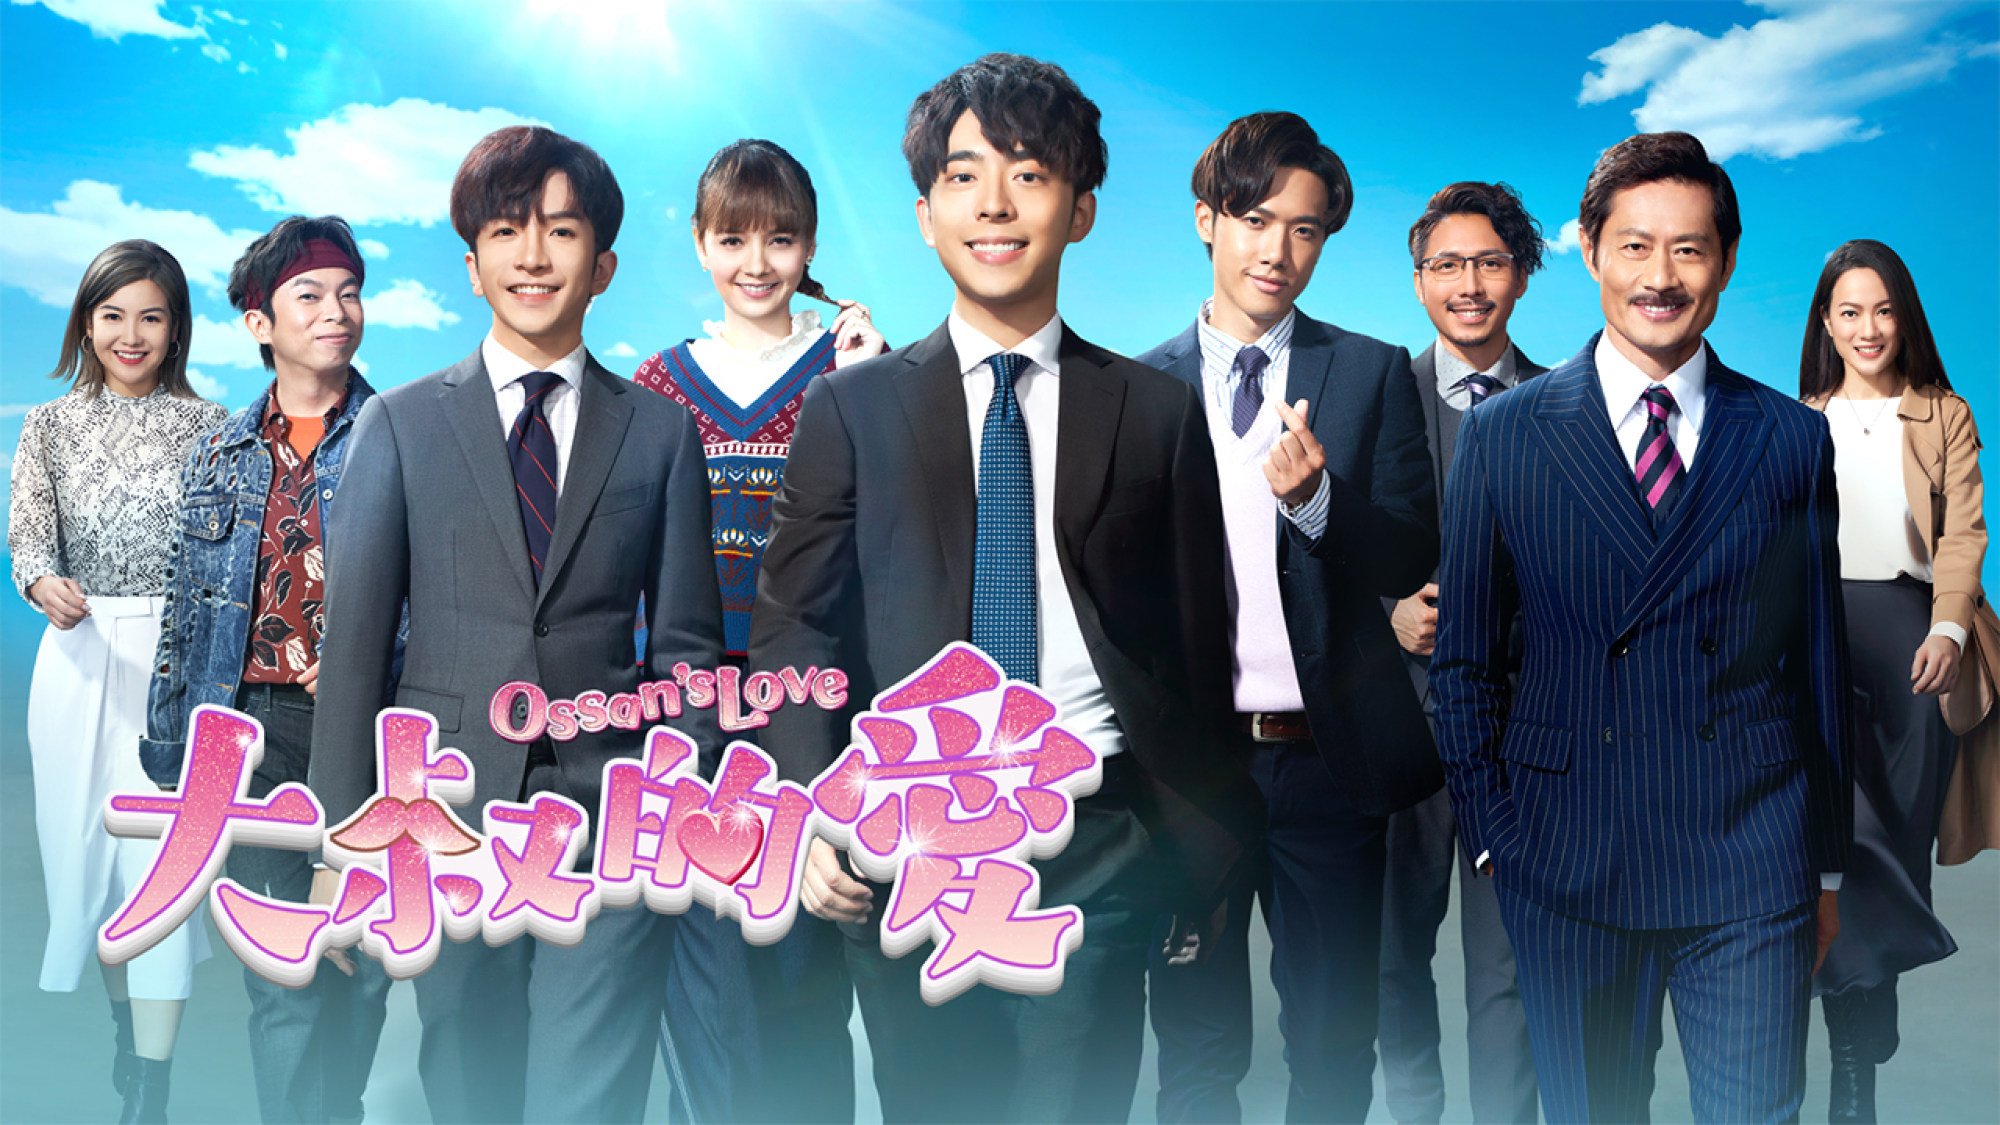 The release of a Hong Kong remake of Japanese BL series Ossan’s Love in 2021 was met with positive reviews and has become ViuTV’s highest-rated drama since 2016. Photo: Handout